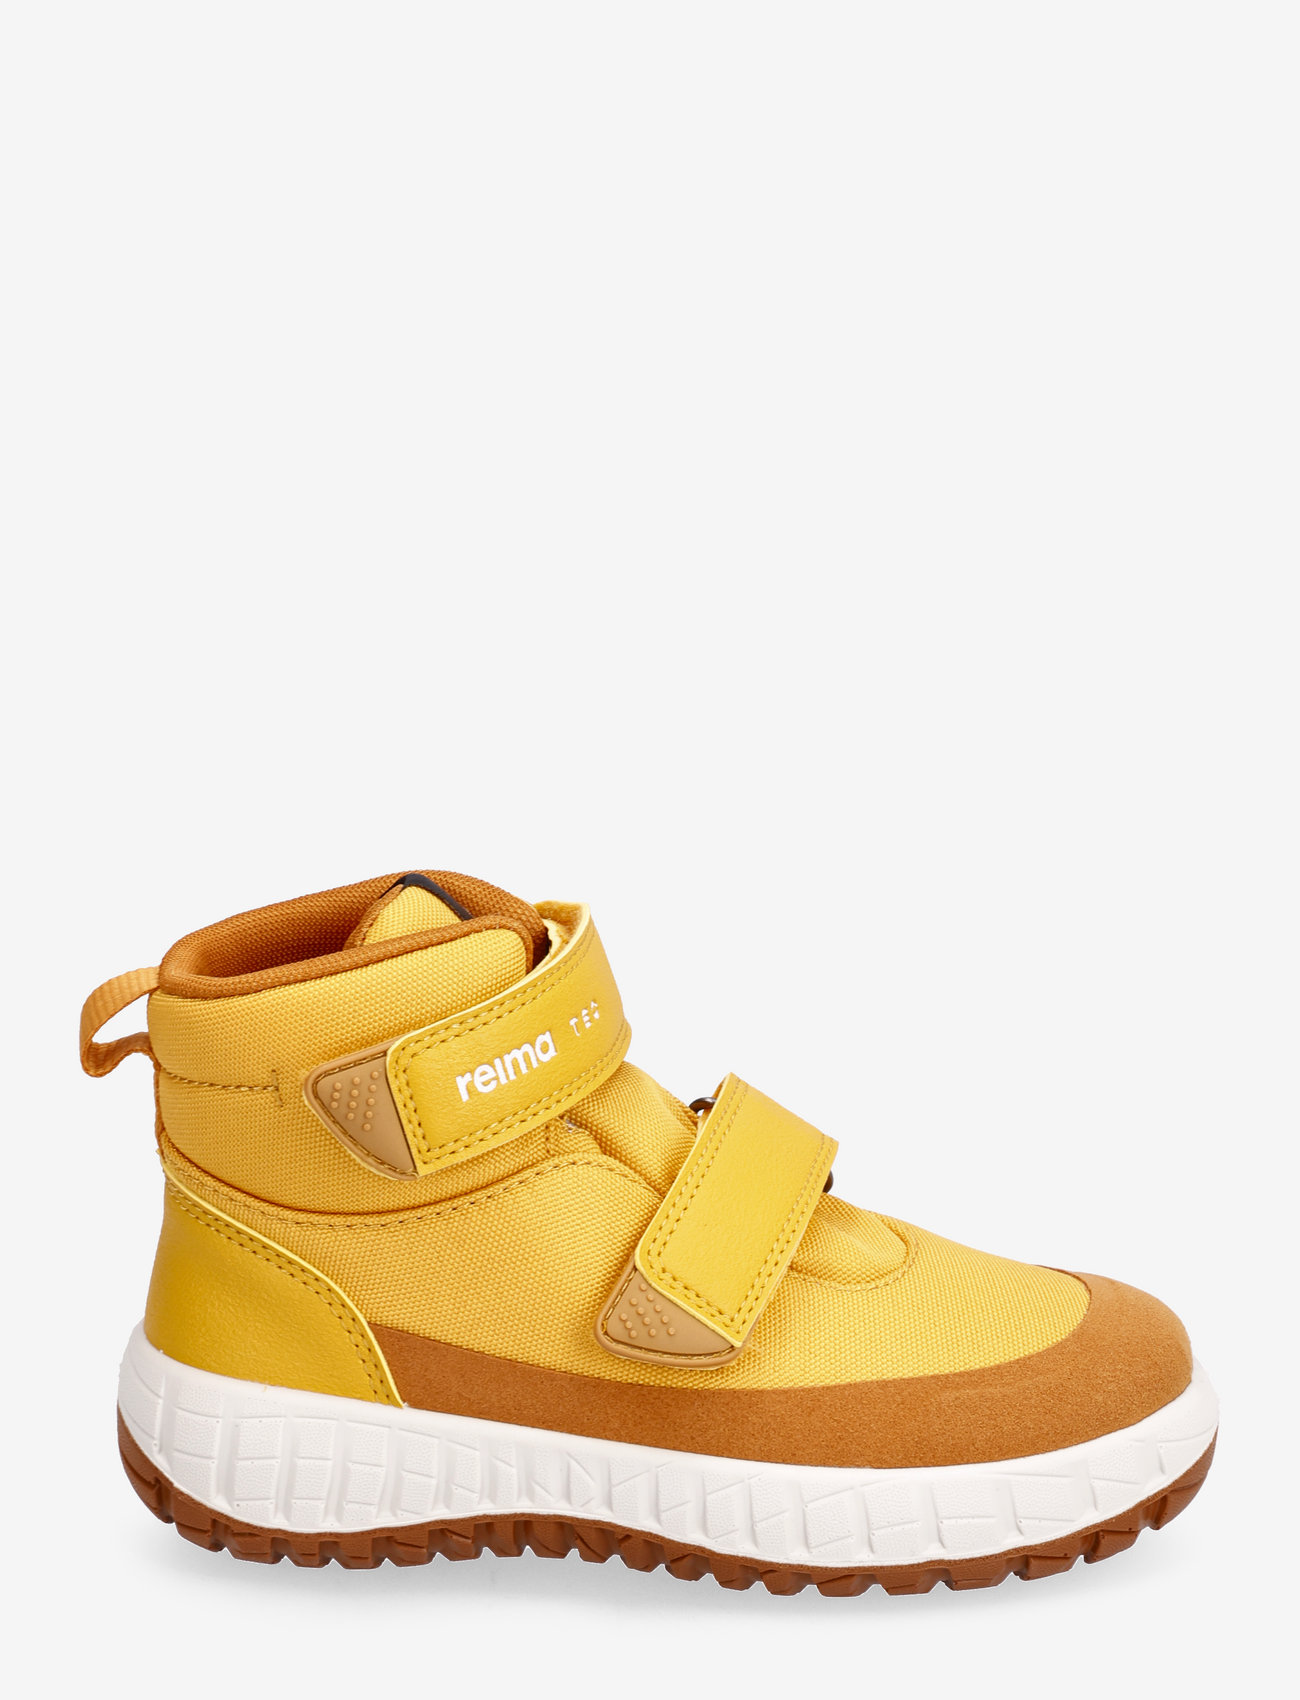 Reima - Reimatec shoes, Patter 2.0 - høje sneakers - ochre yellow - 1